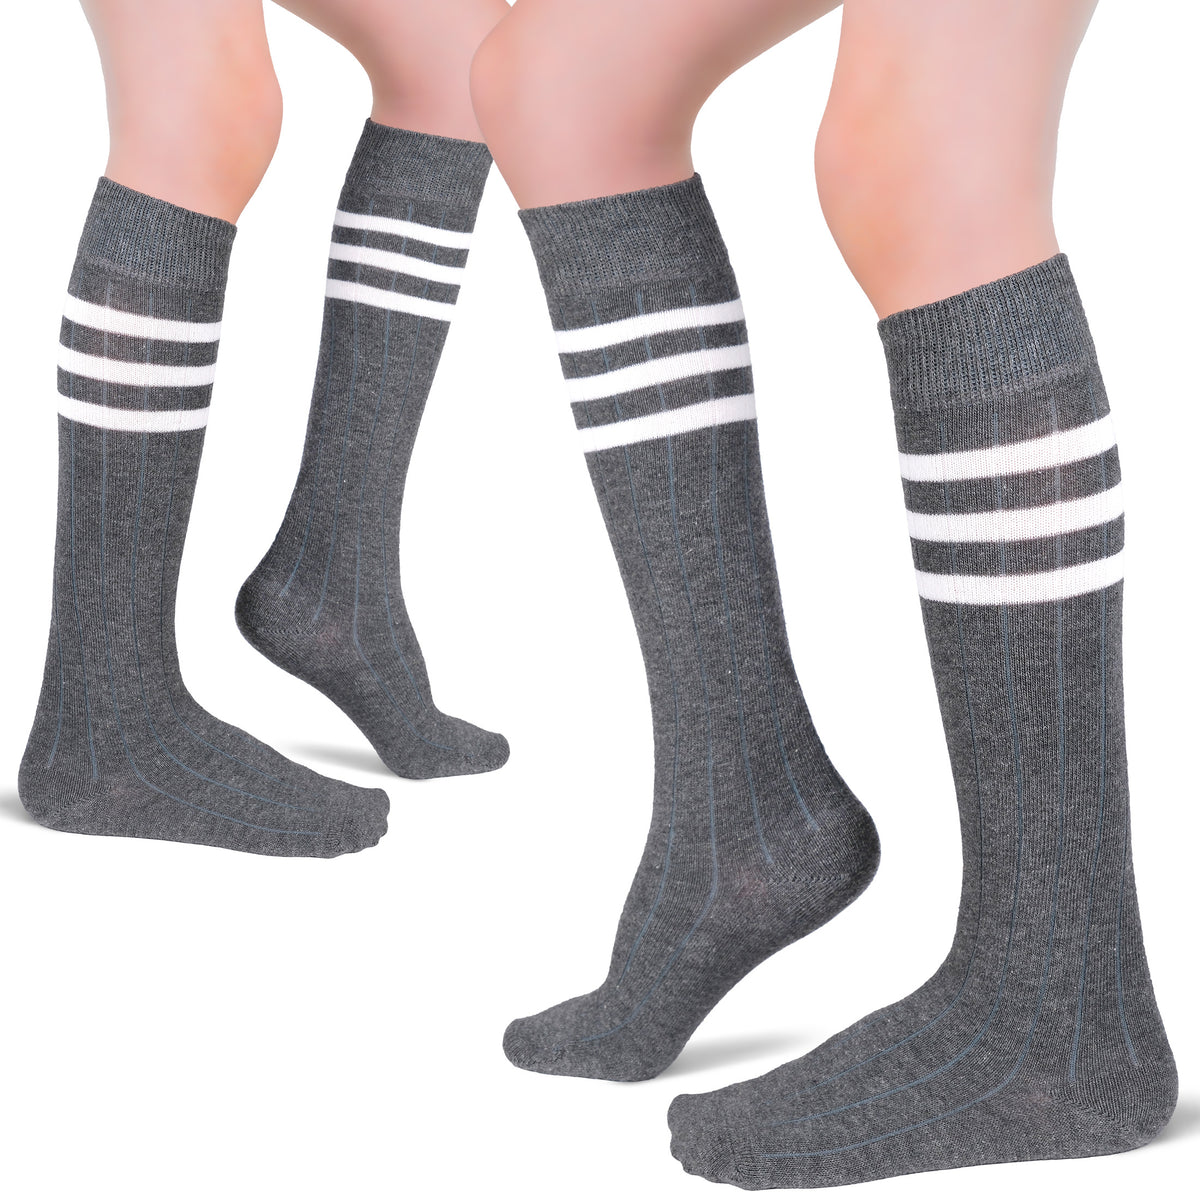 This image depicts two women wearing Cotton Kids' Knee-High Socks in gray with white stripes.